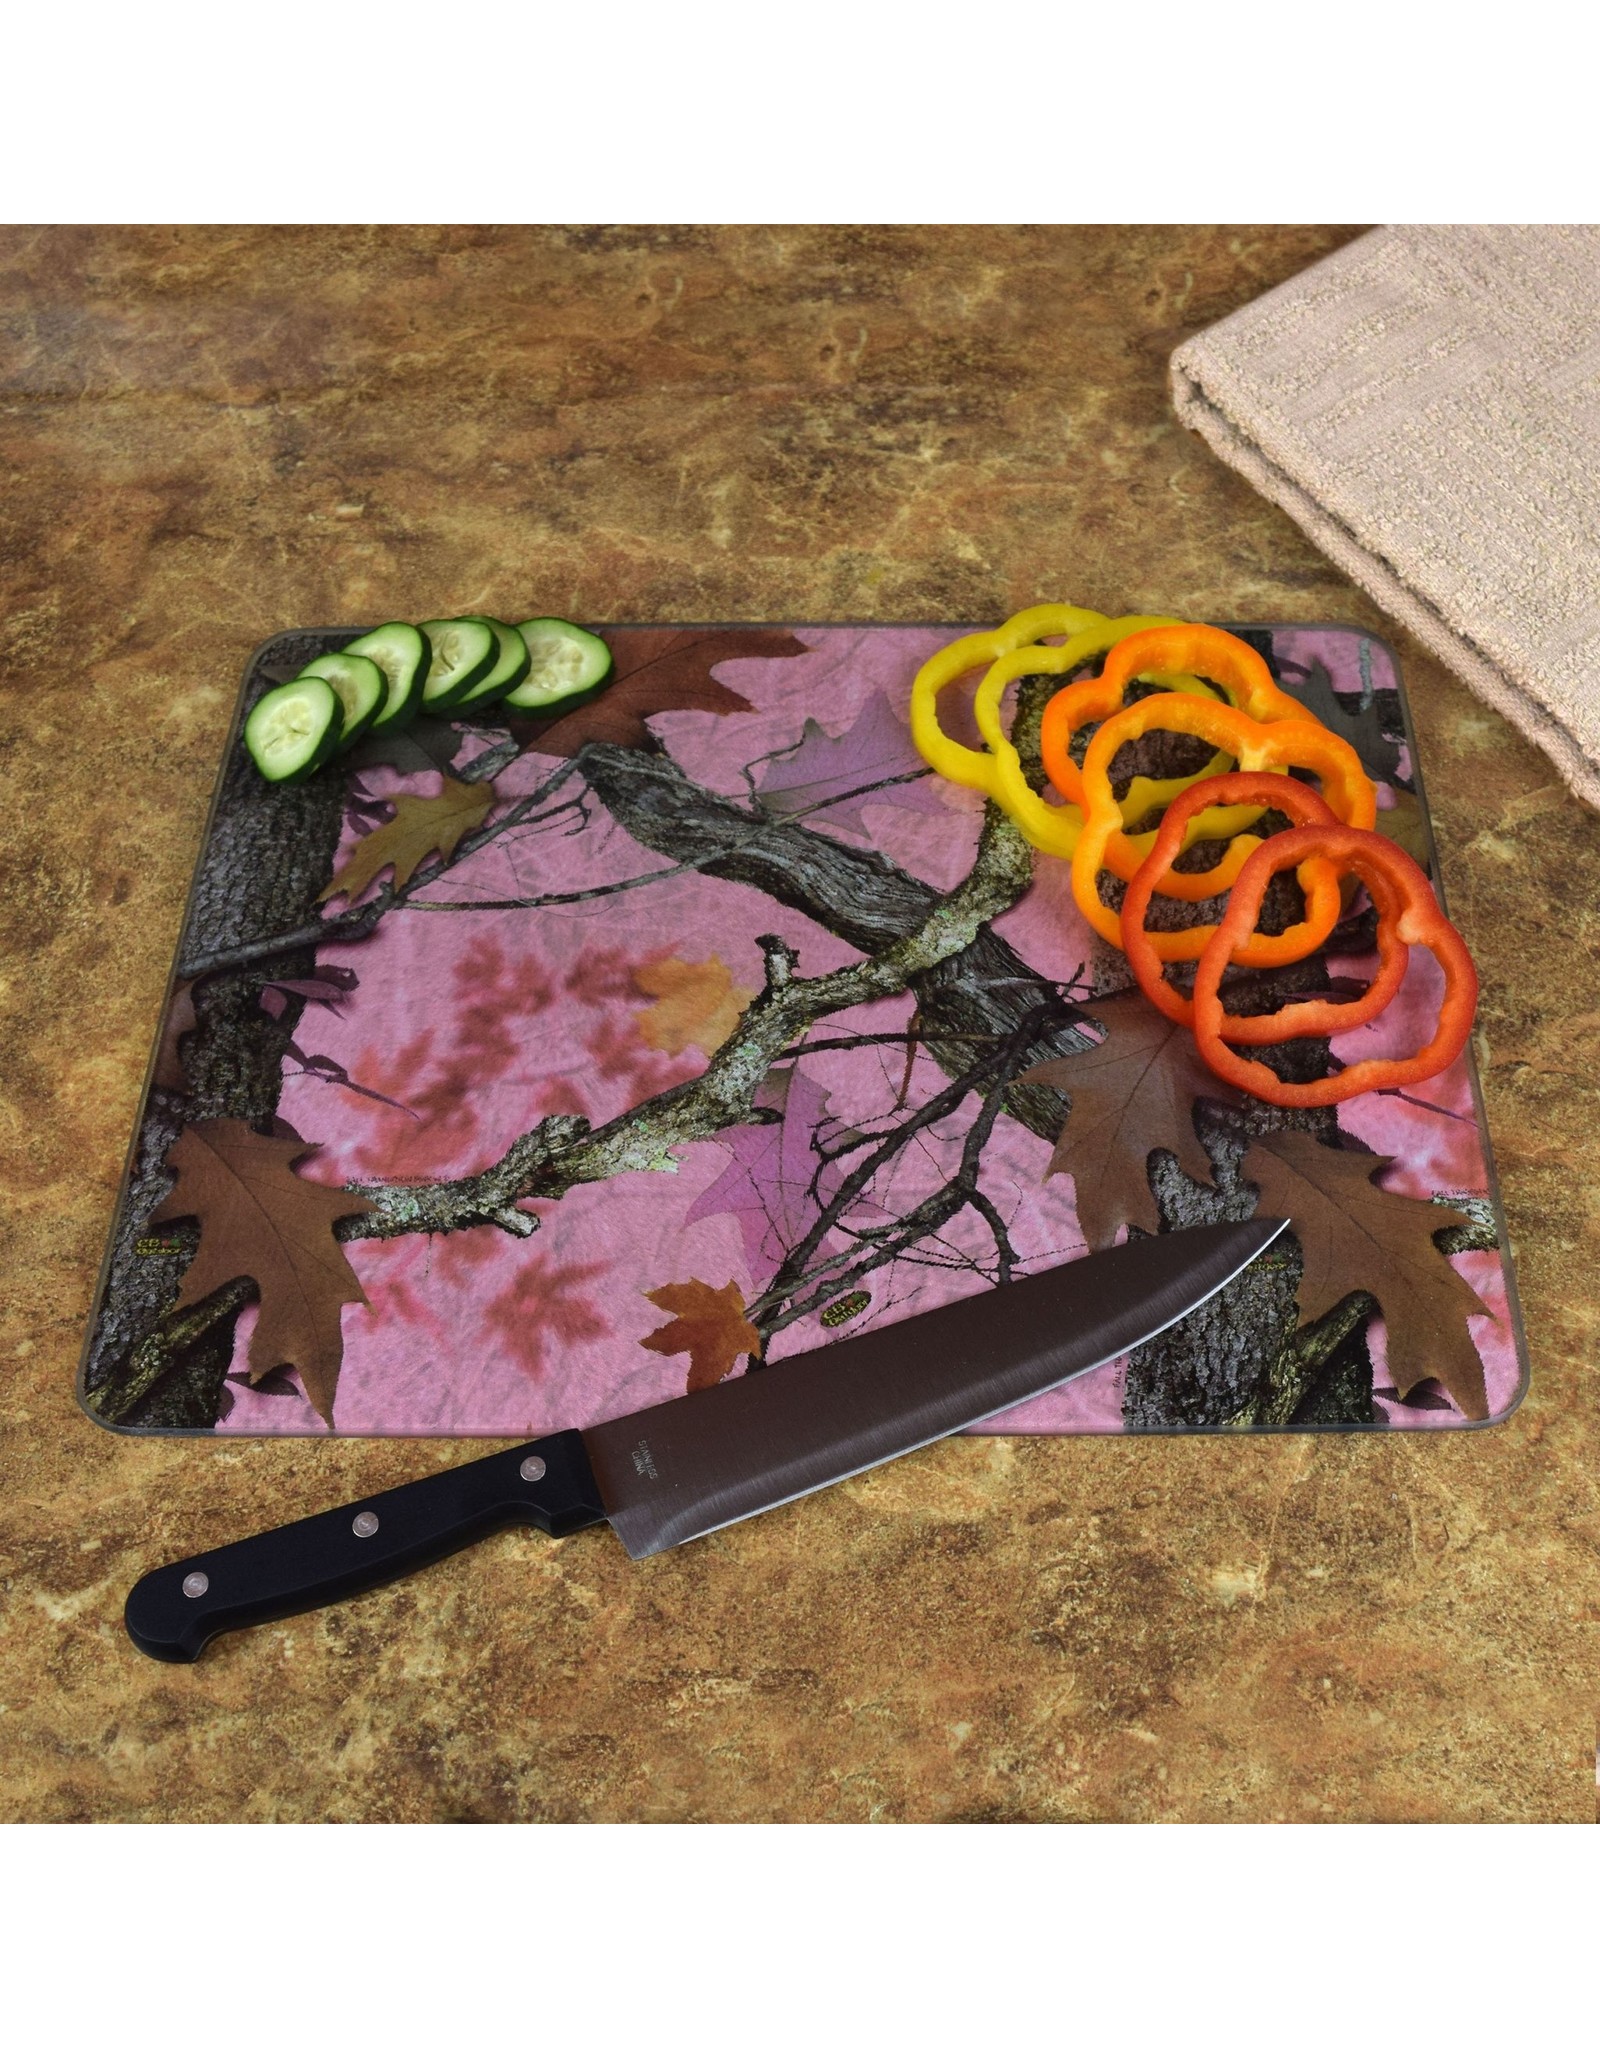 Rivers Edge Products Cutting Board 12in x 16in - Pink Camo